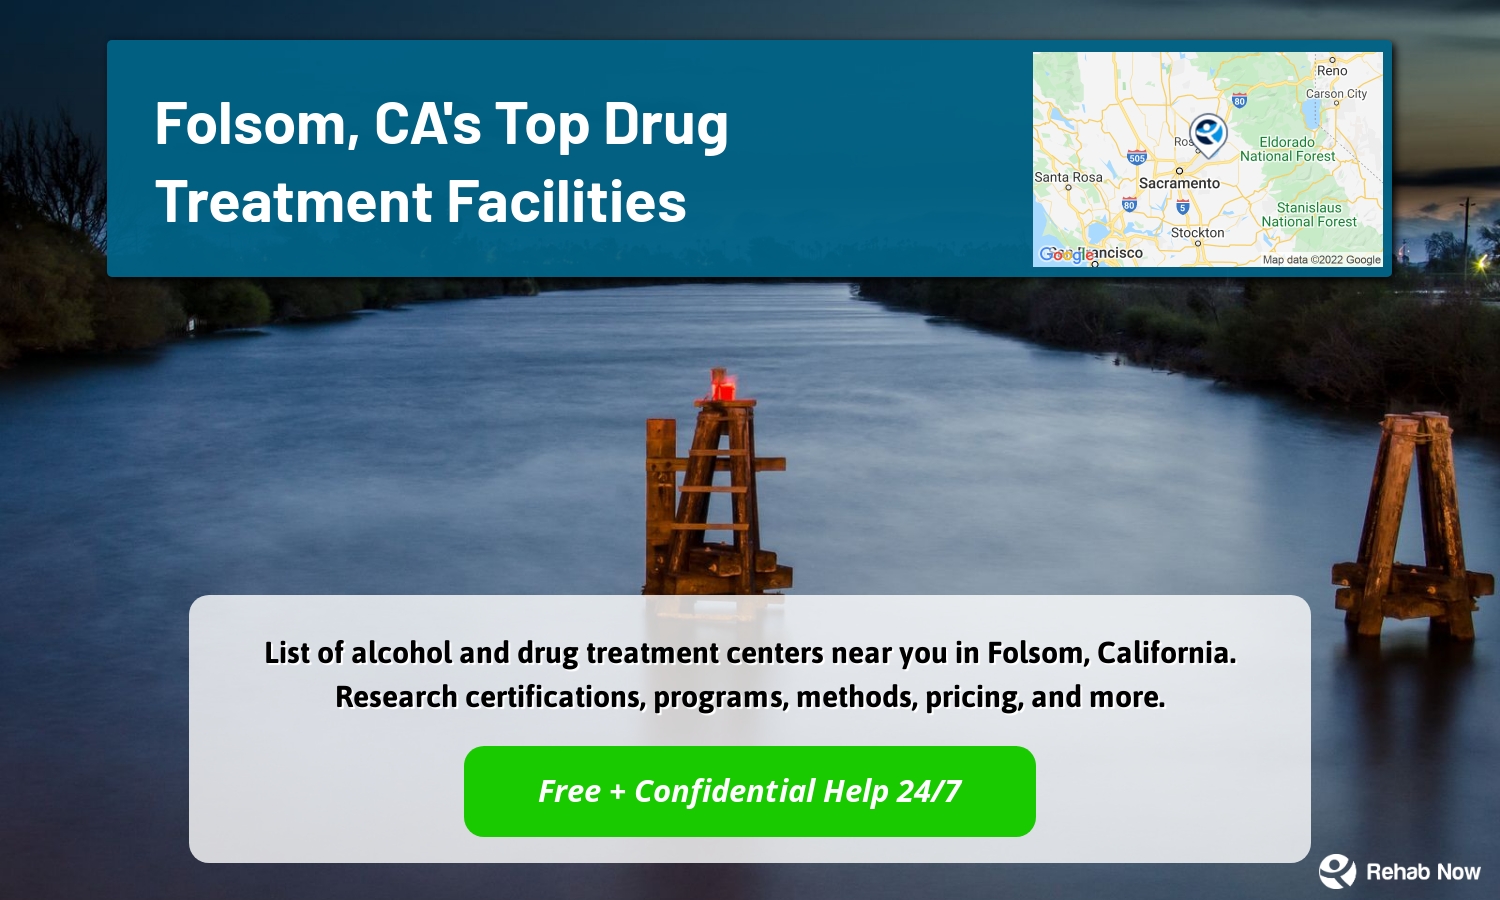 List of alcohol and drug treatment centers near you in Folsom, California. Research certifications, programs, methods, pricing, and more.